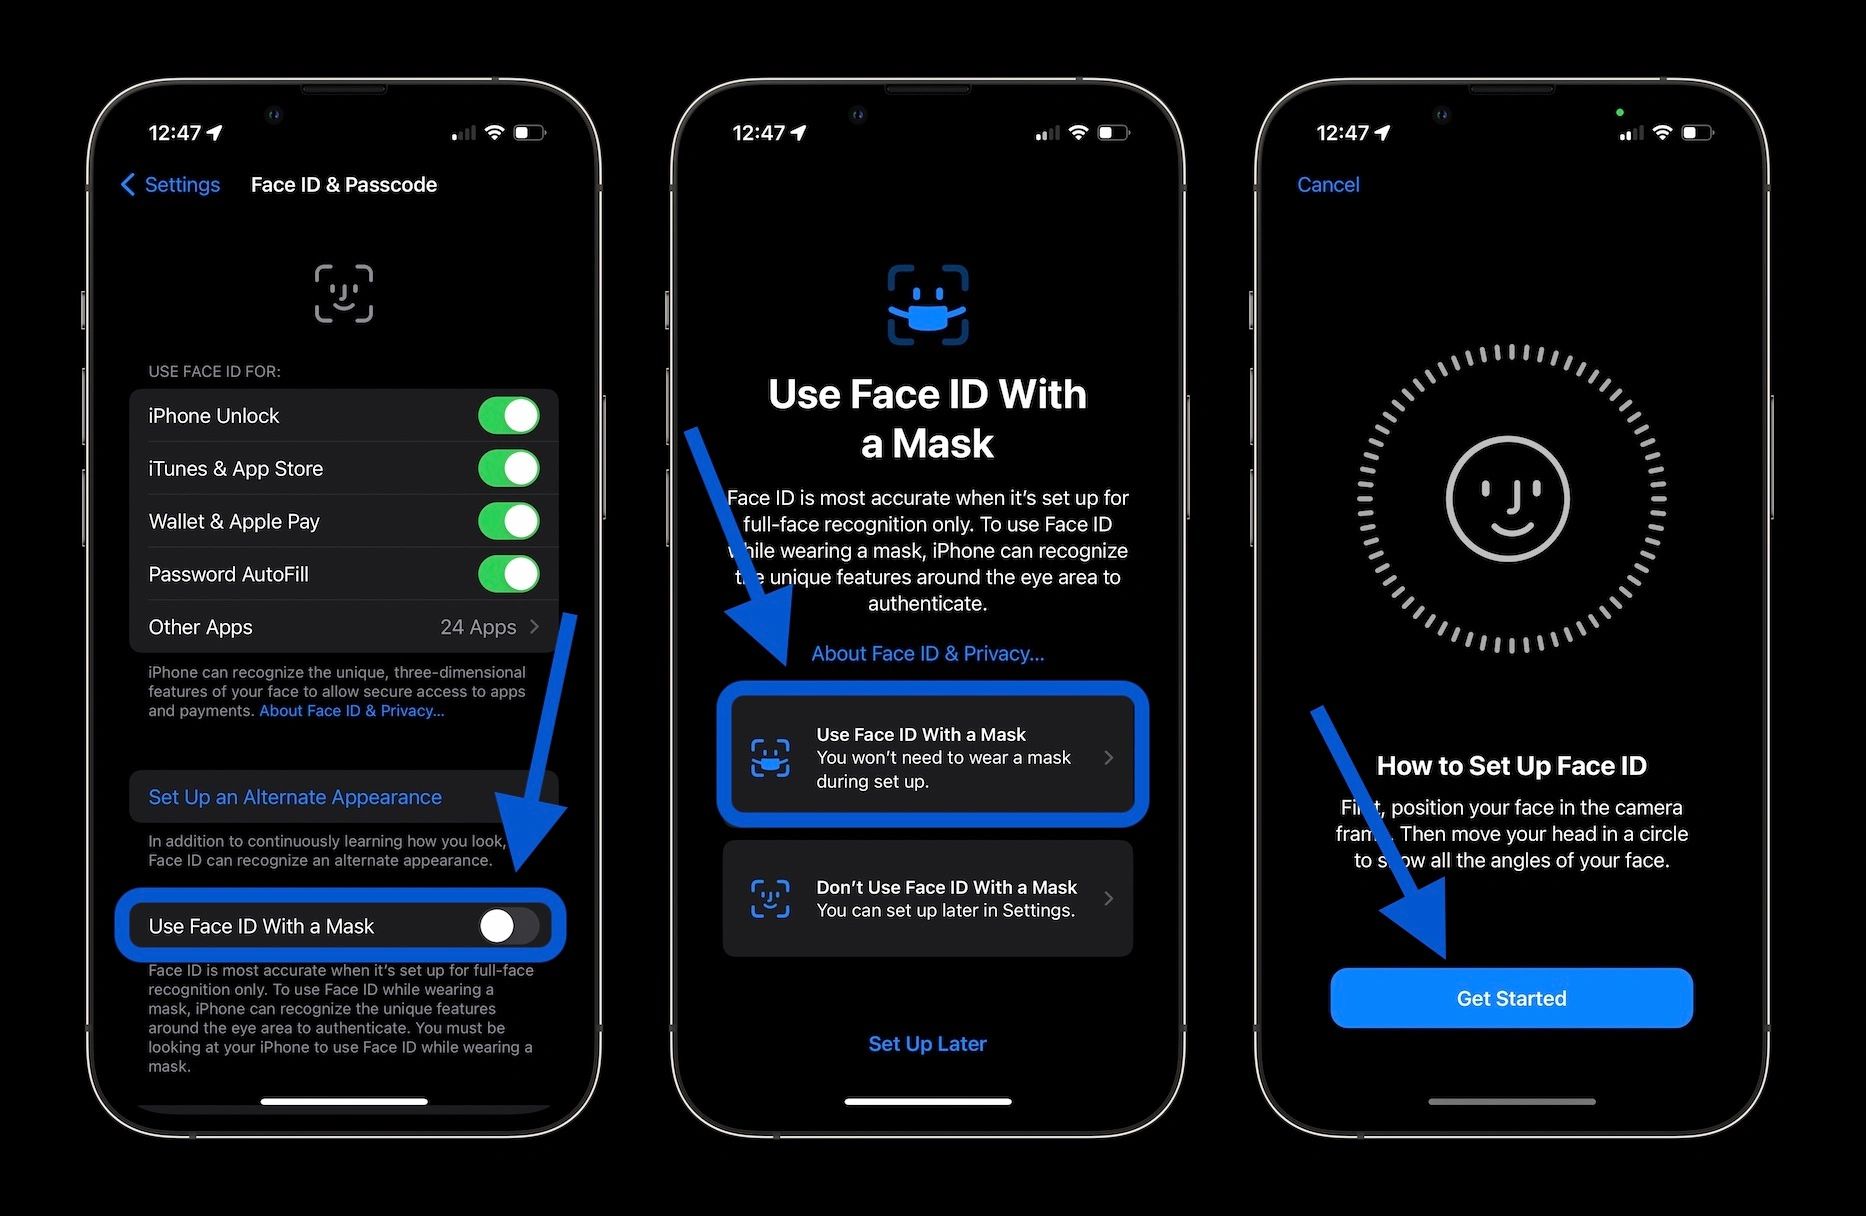 Hands-on: Here’s How to Use iPhone’s Face ID With a Mask in iOS 15.4